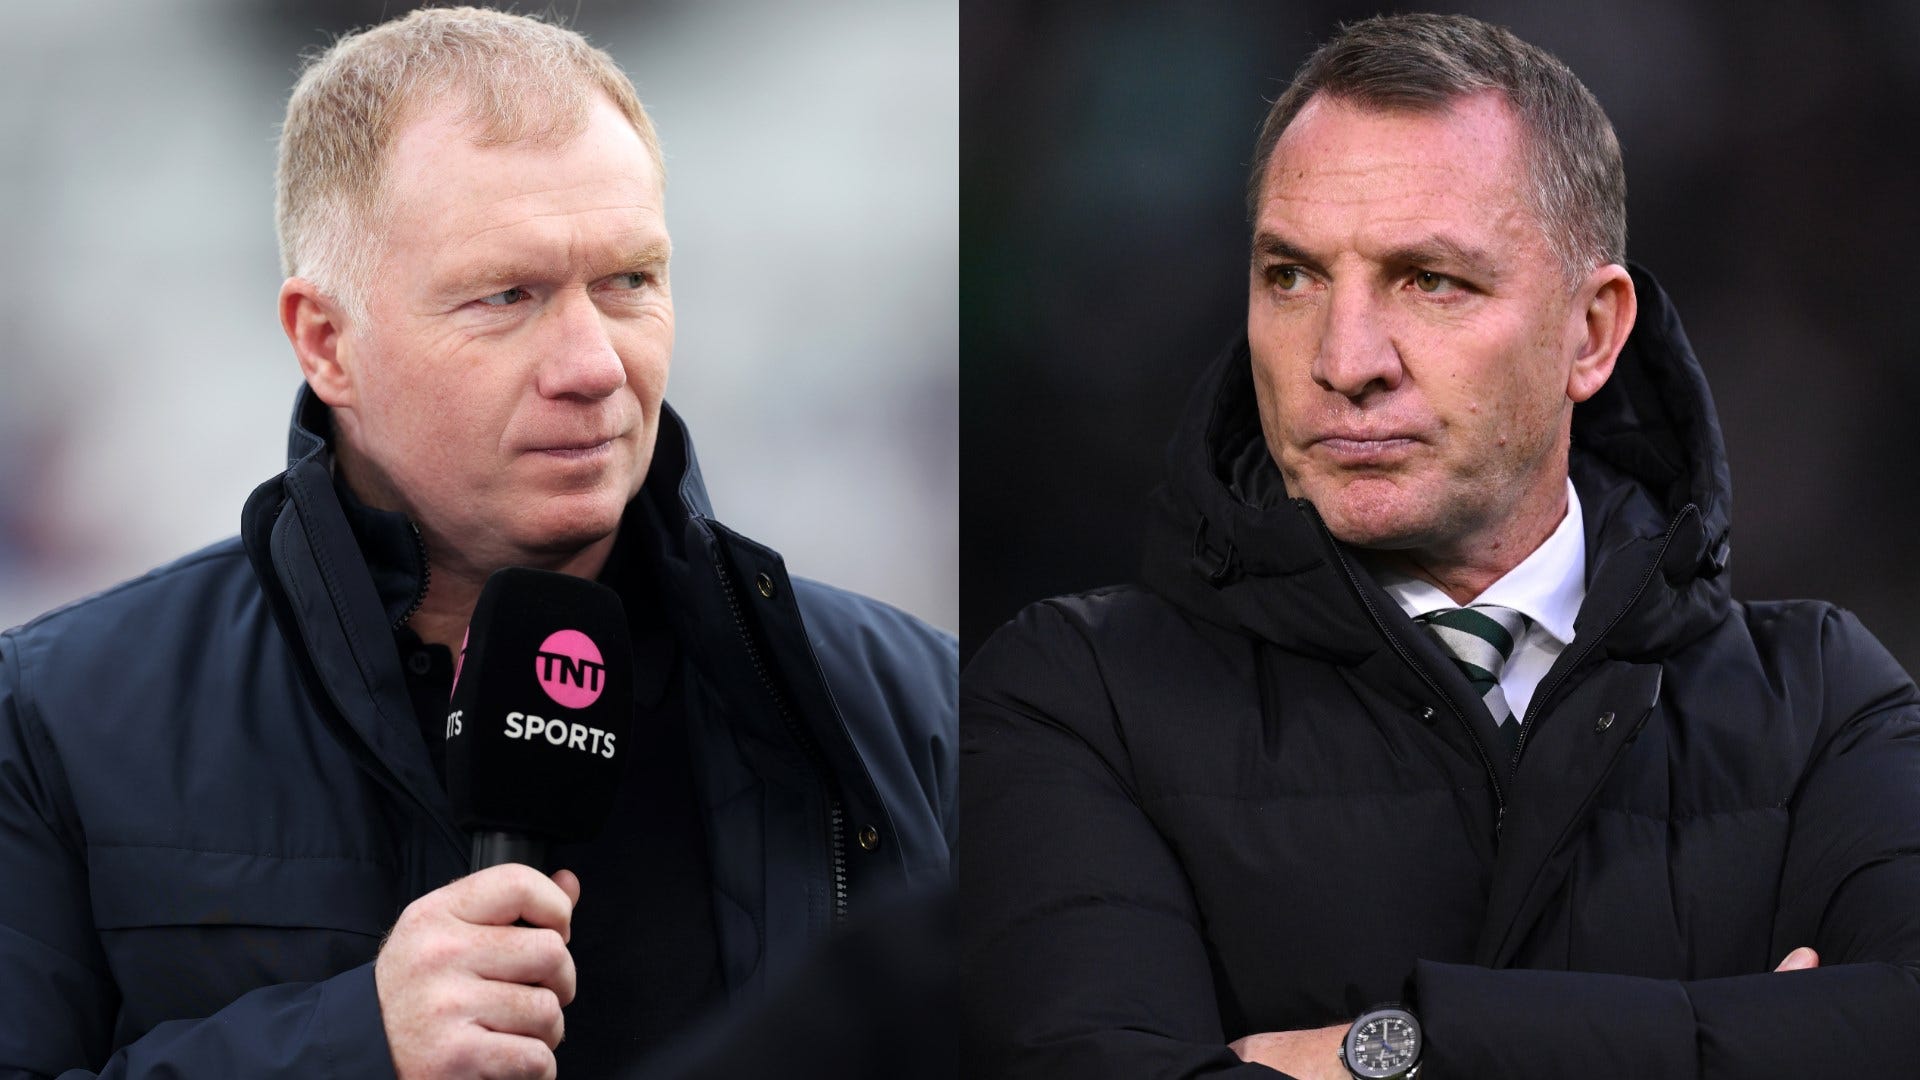 'This world needs to f*ck off!' - Man Utd legend Paul Scholes appears to post furious reaction to Brendan Rodgers 'dinosaur' label from his bathtub amid sexism storm surrounding Celtic boss